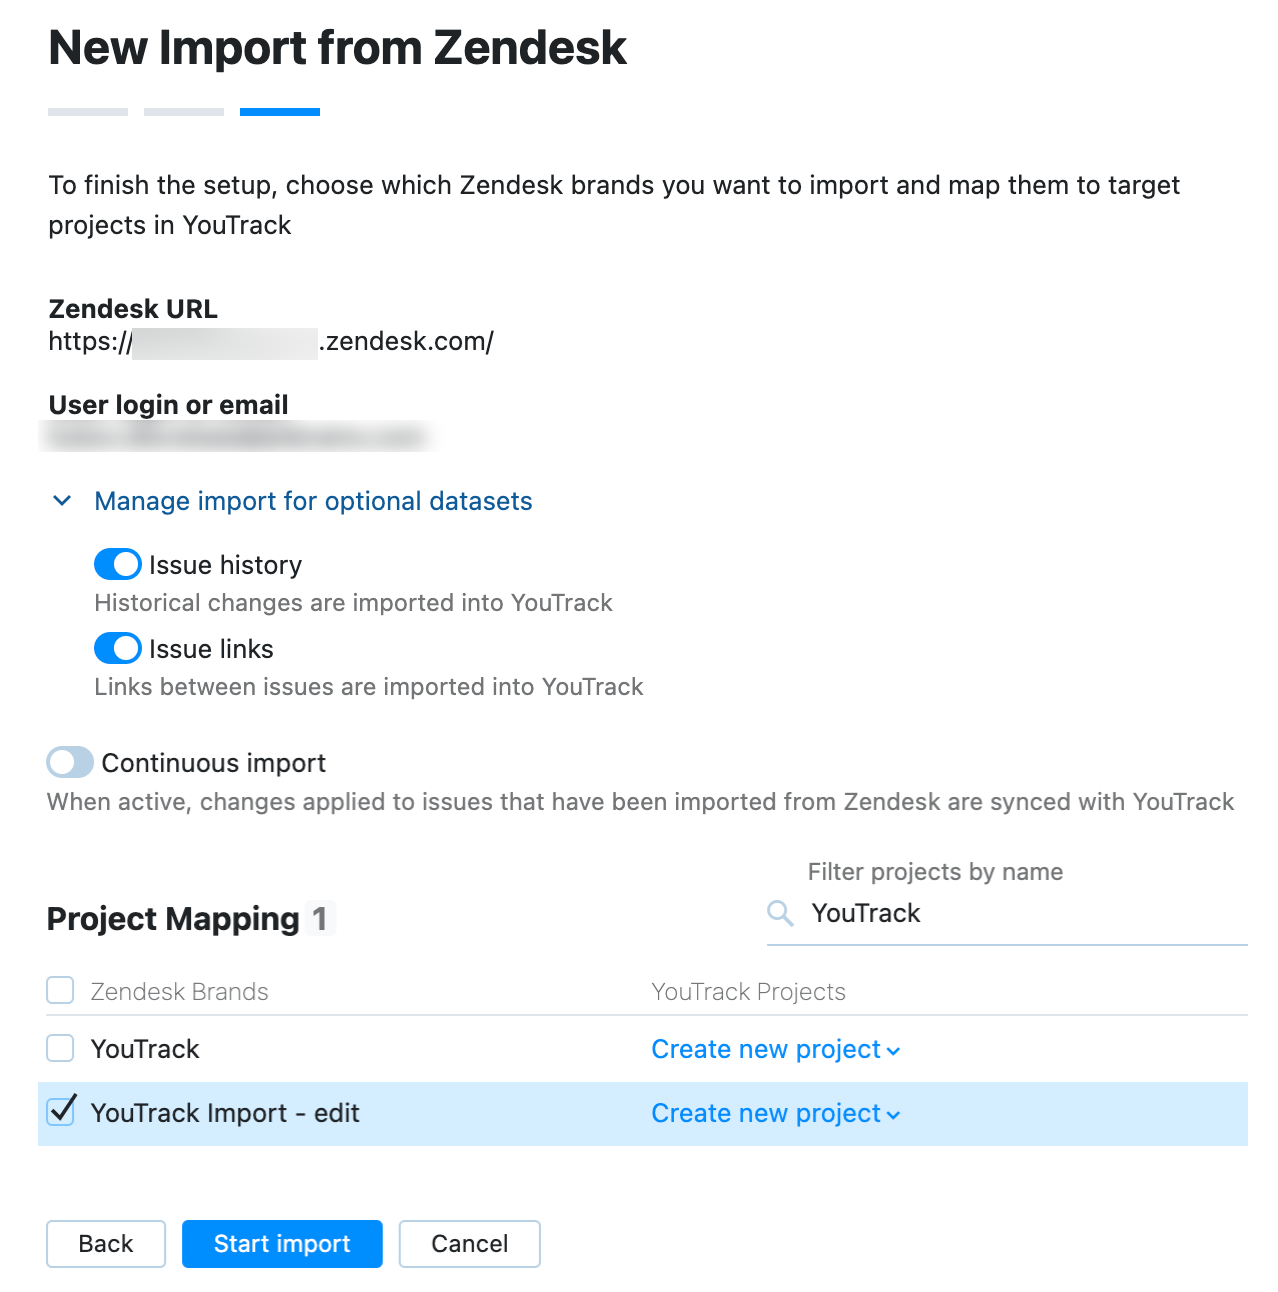 Confirm settings and start import